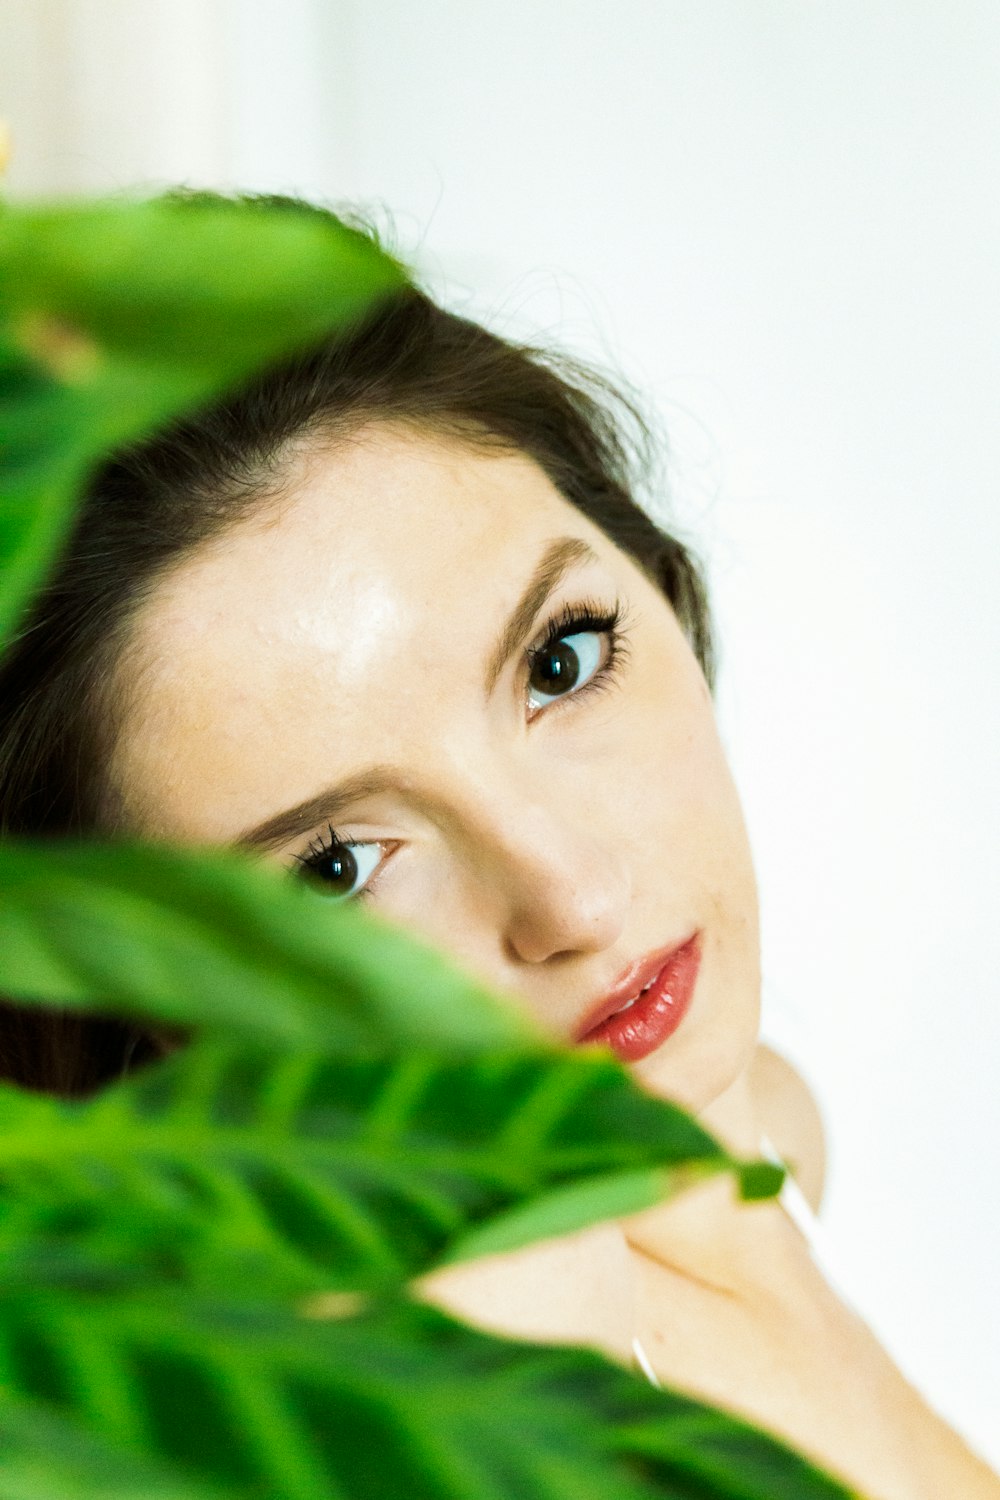 a woman with blue eyes and a green plant